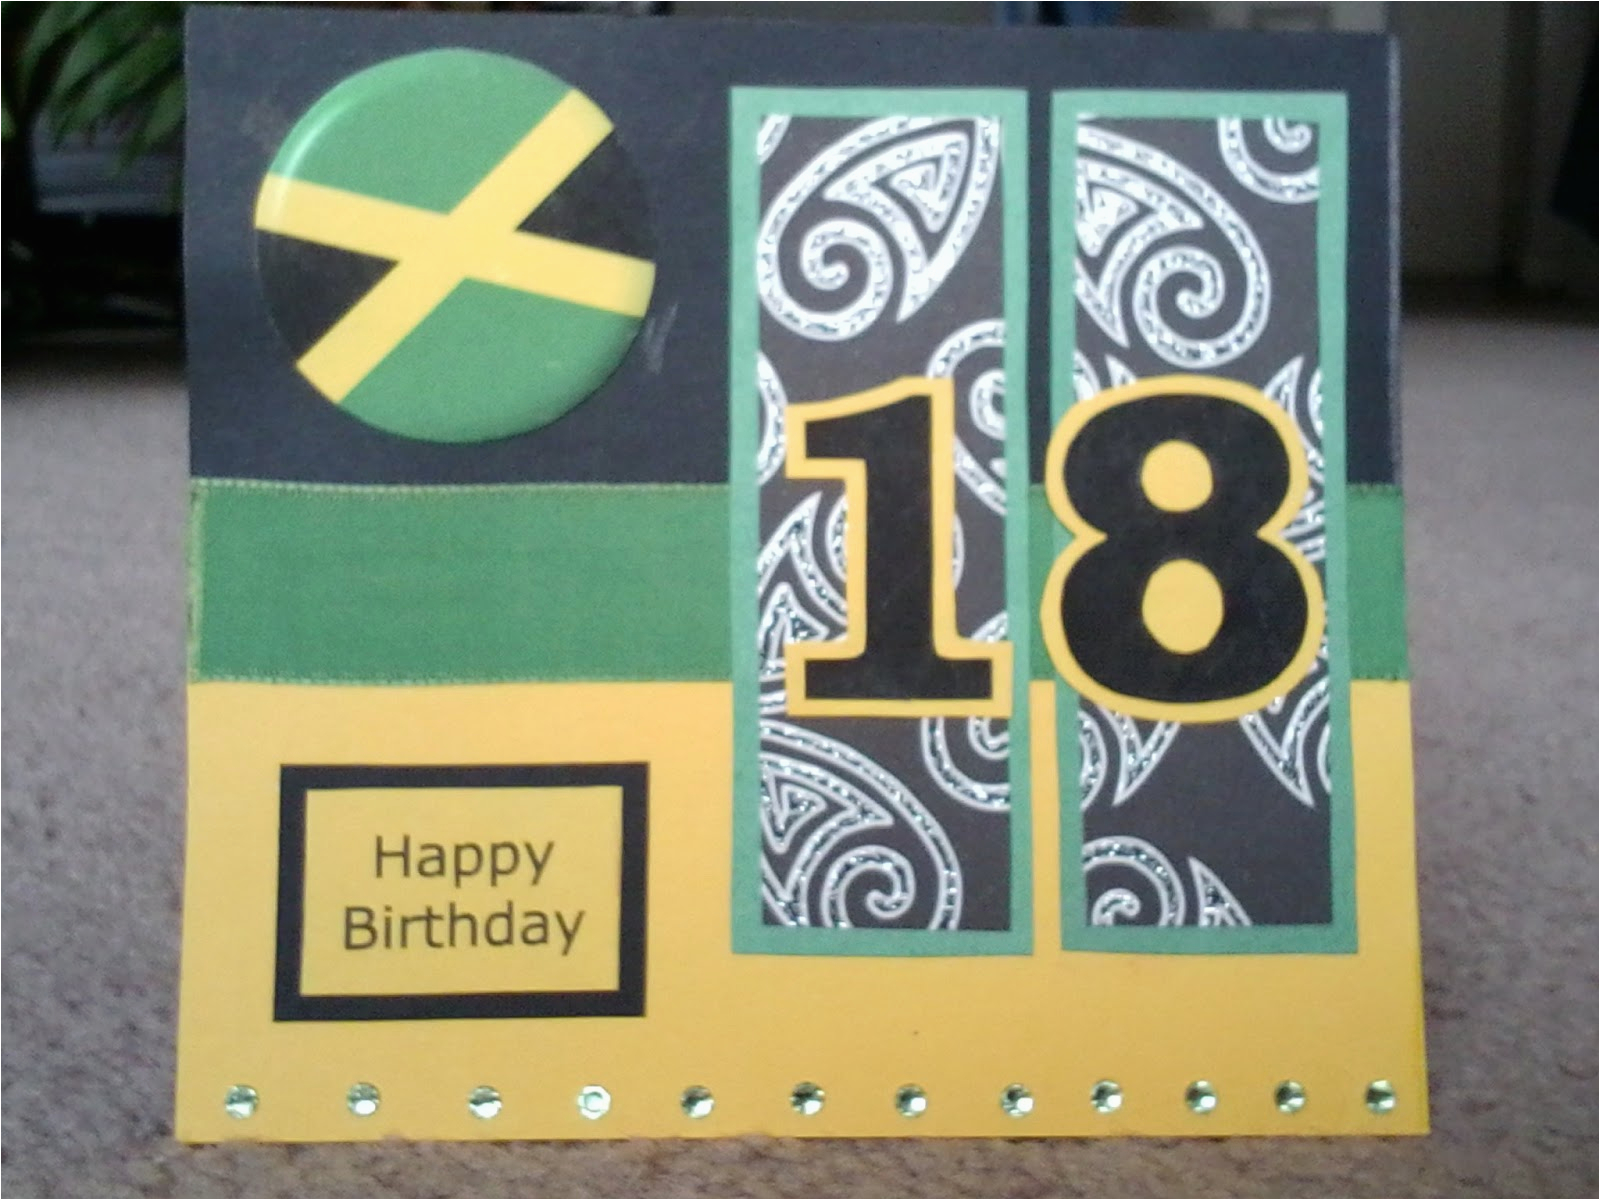 michaes birthday card jamaican inspired